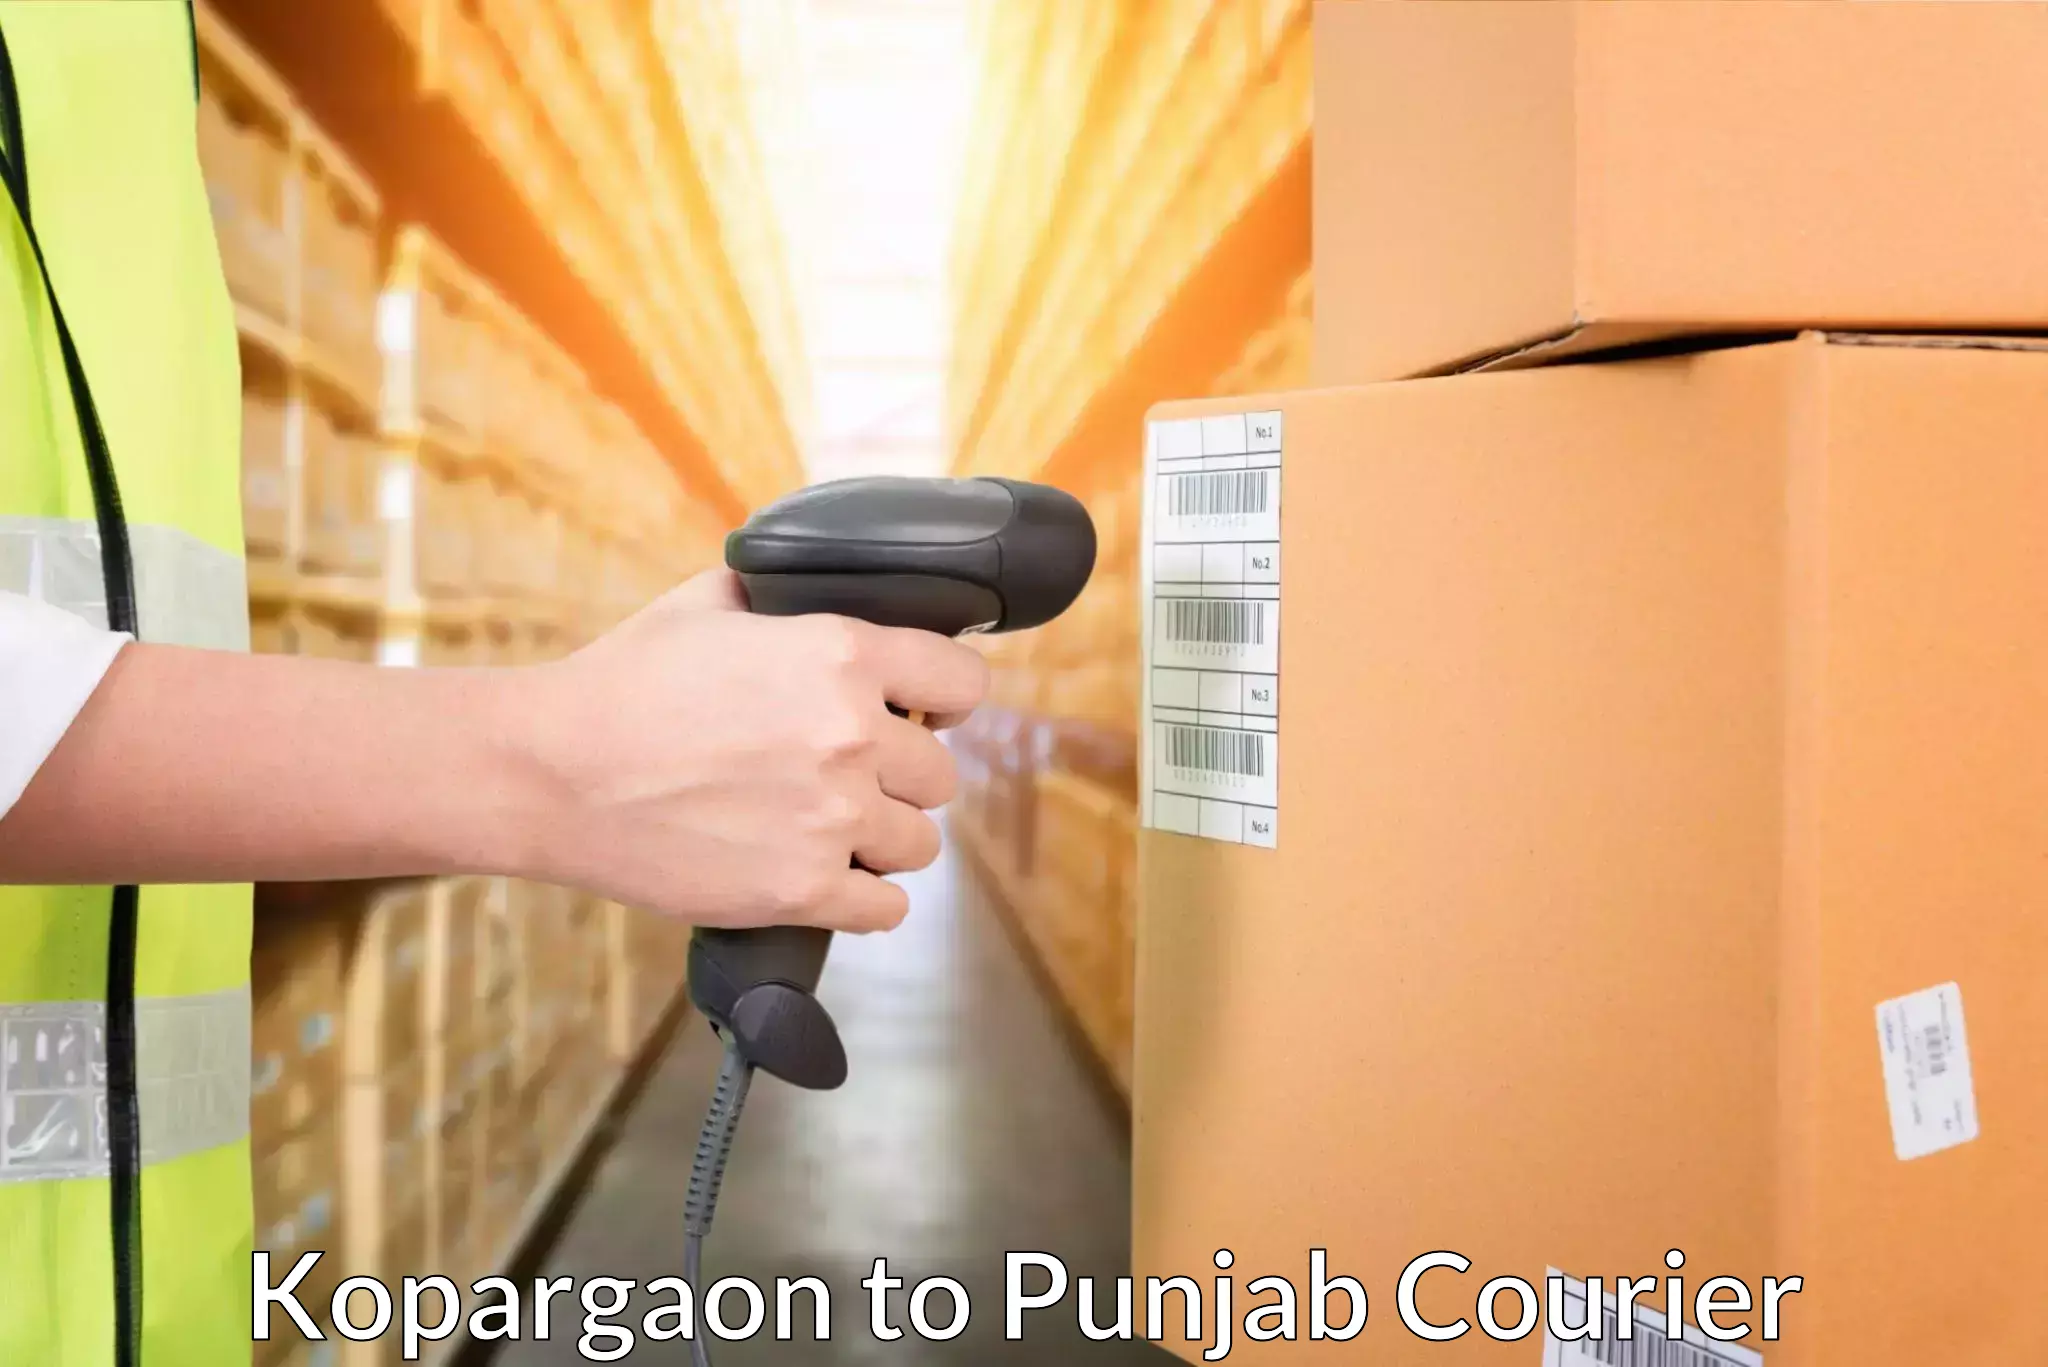 State-of-the-art courier technology Kopargaon to Malerkotla